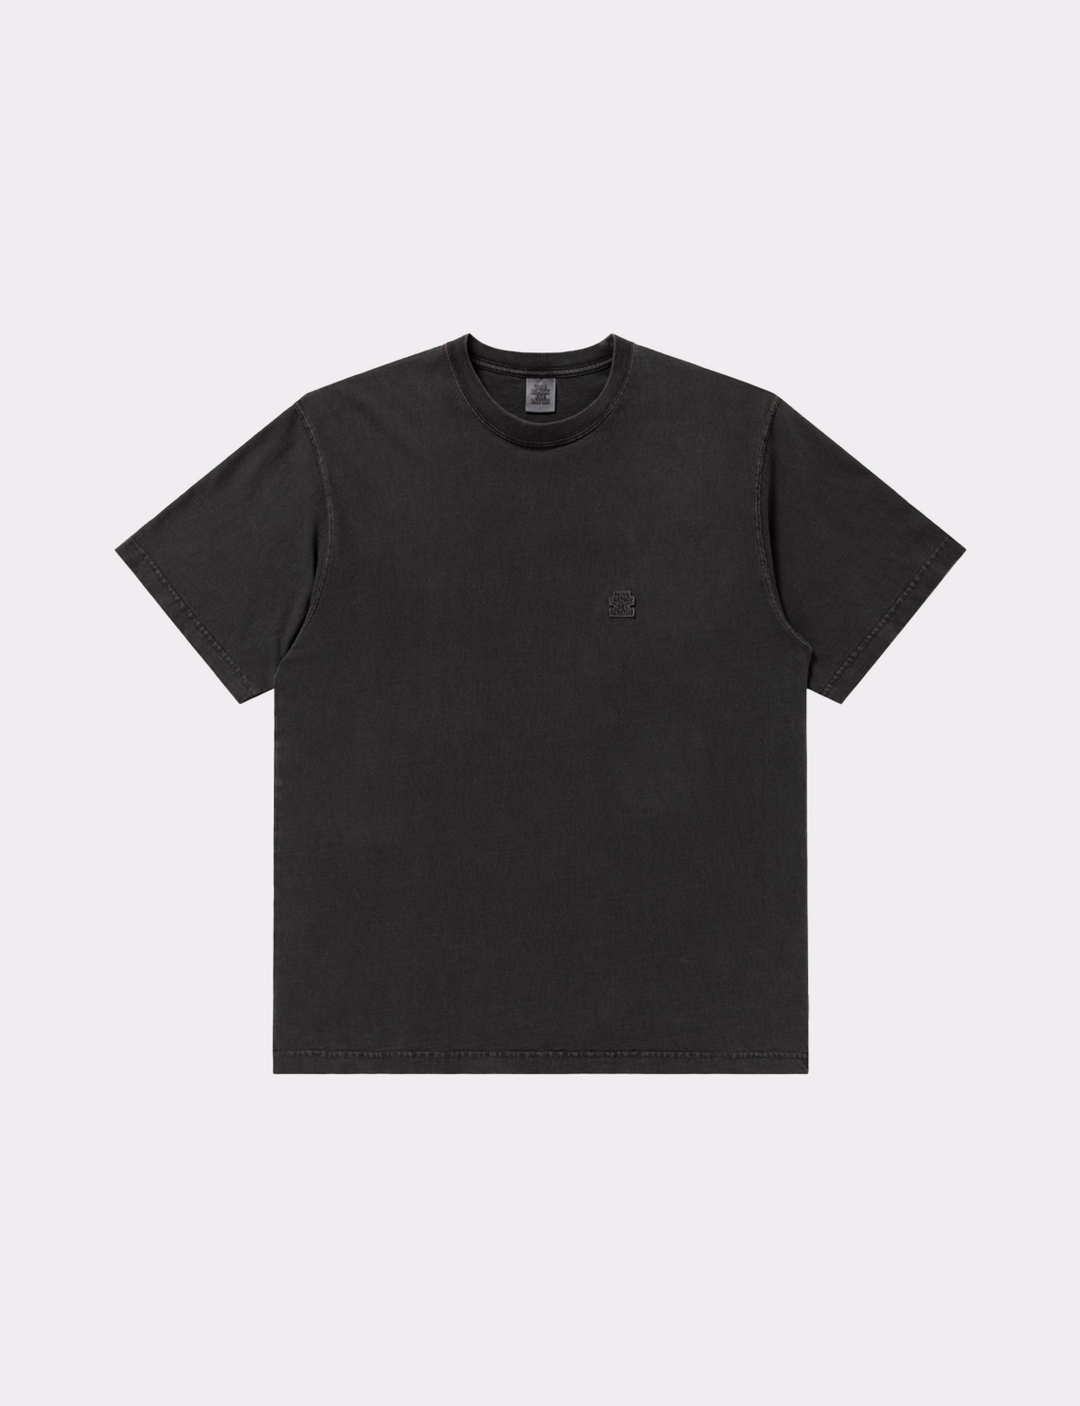 PIGMENT DYED SMALL OG LABEL TEE BLACK